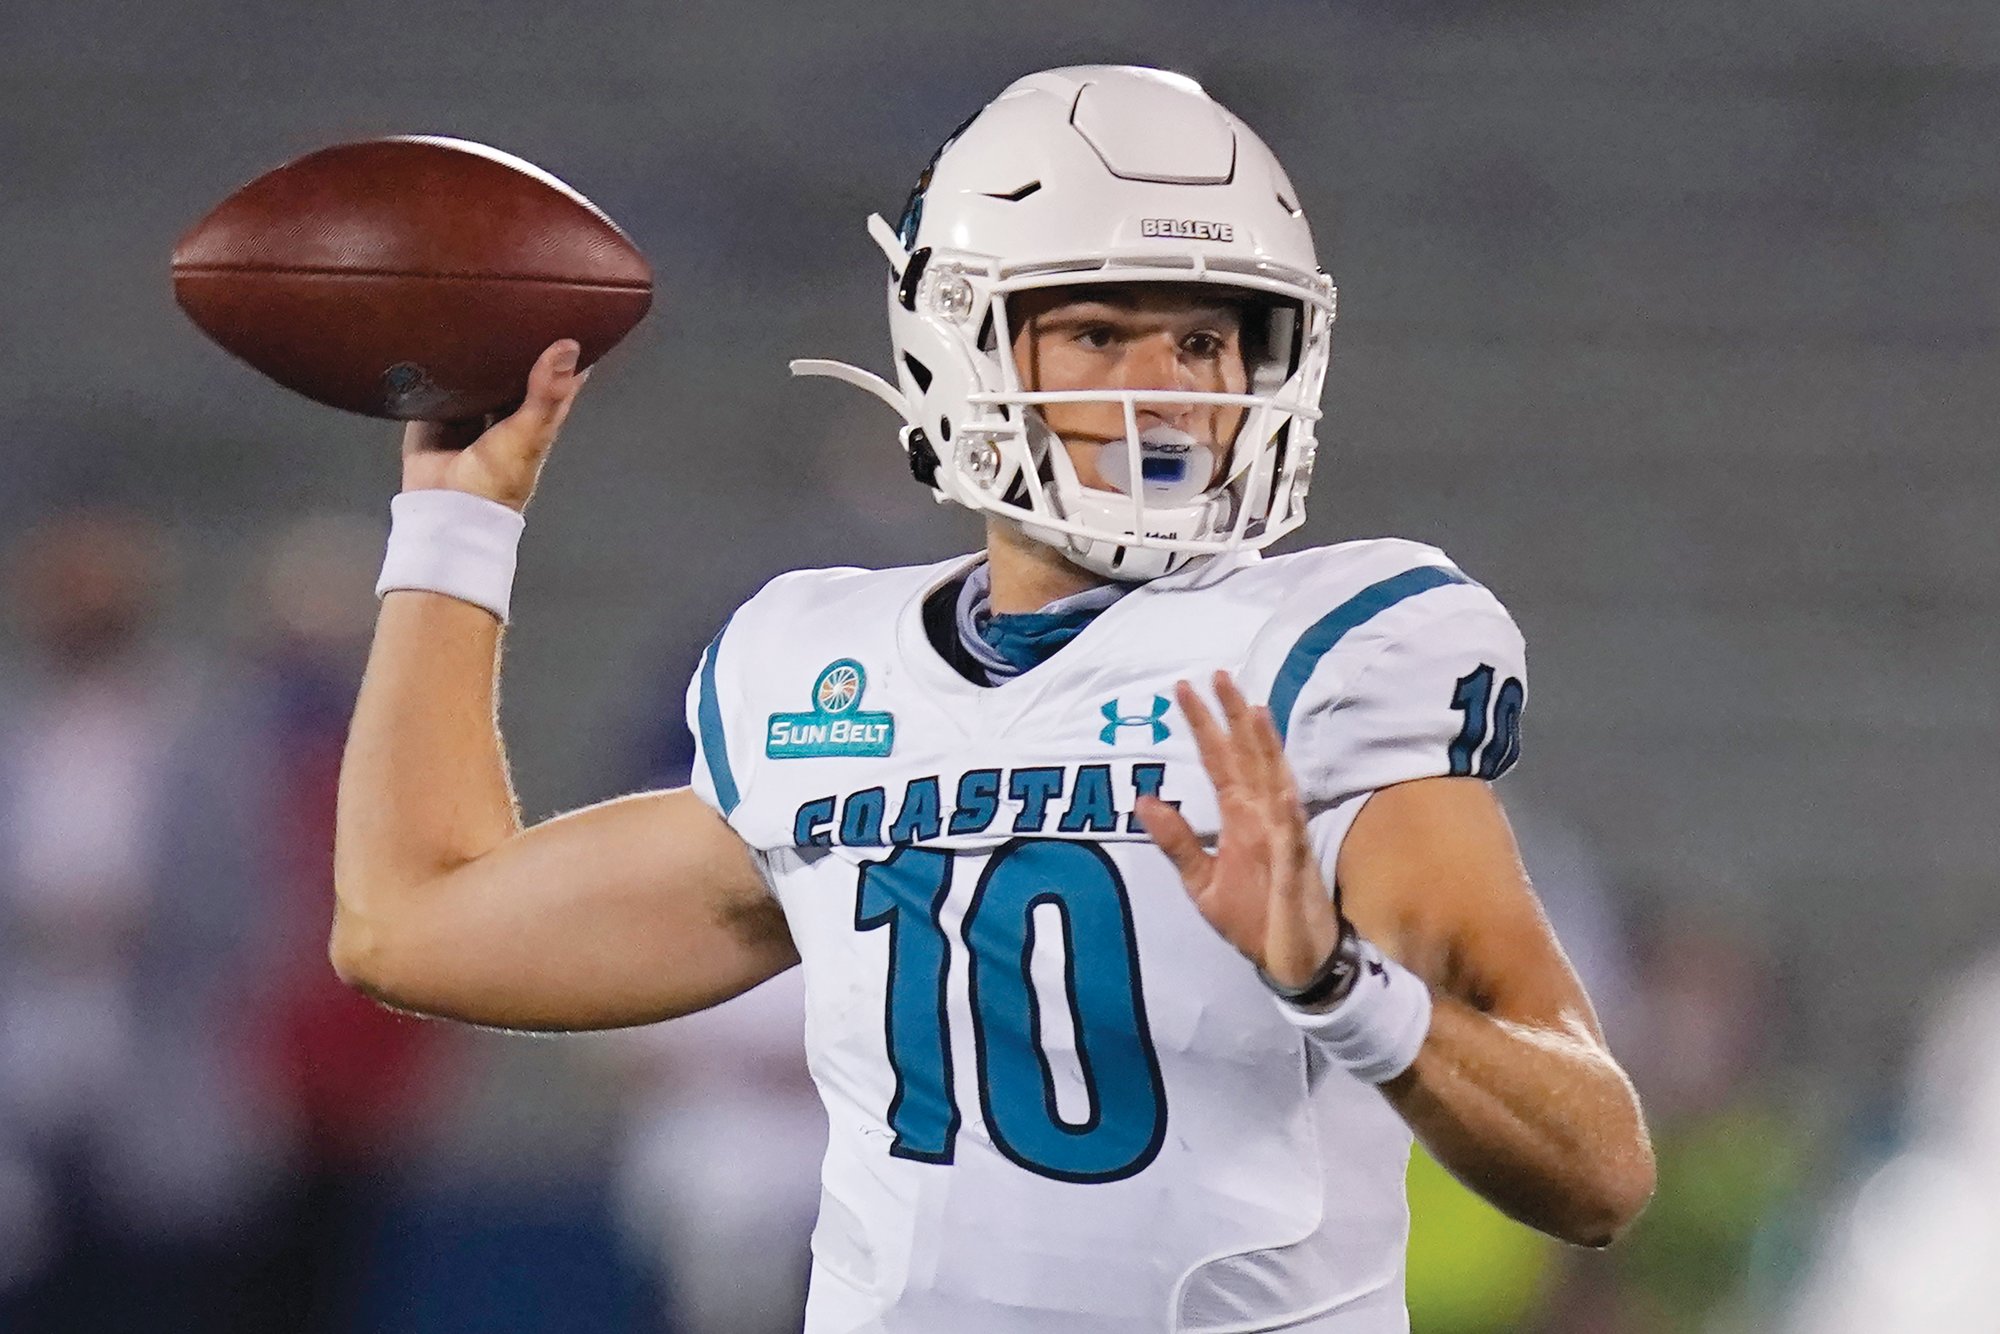 Coastal QB McCall ready to 'rock and roll' | The Sumter Item